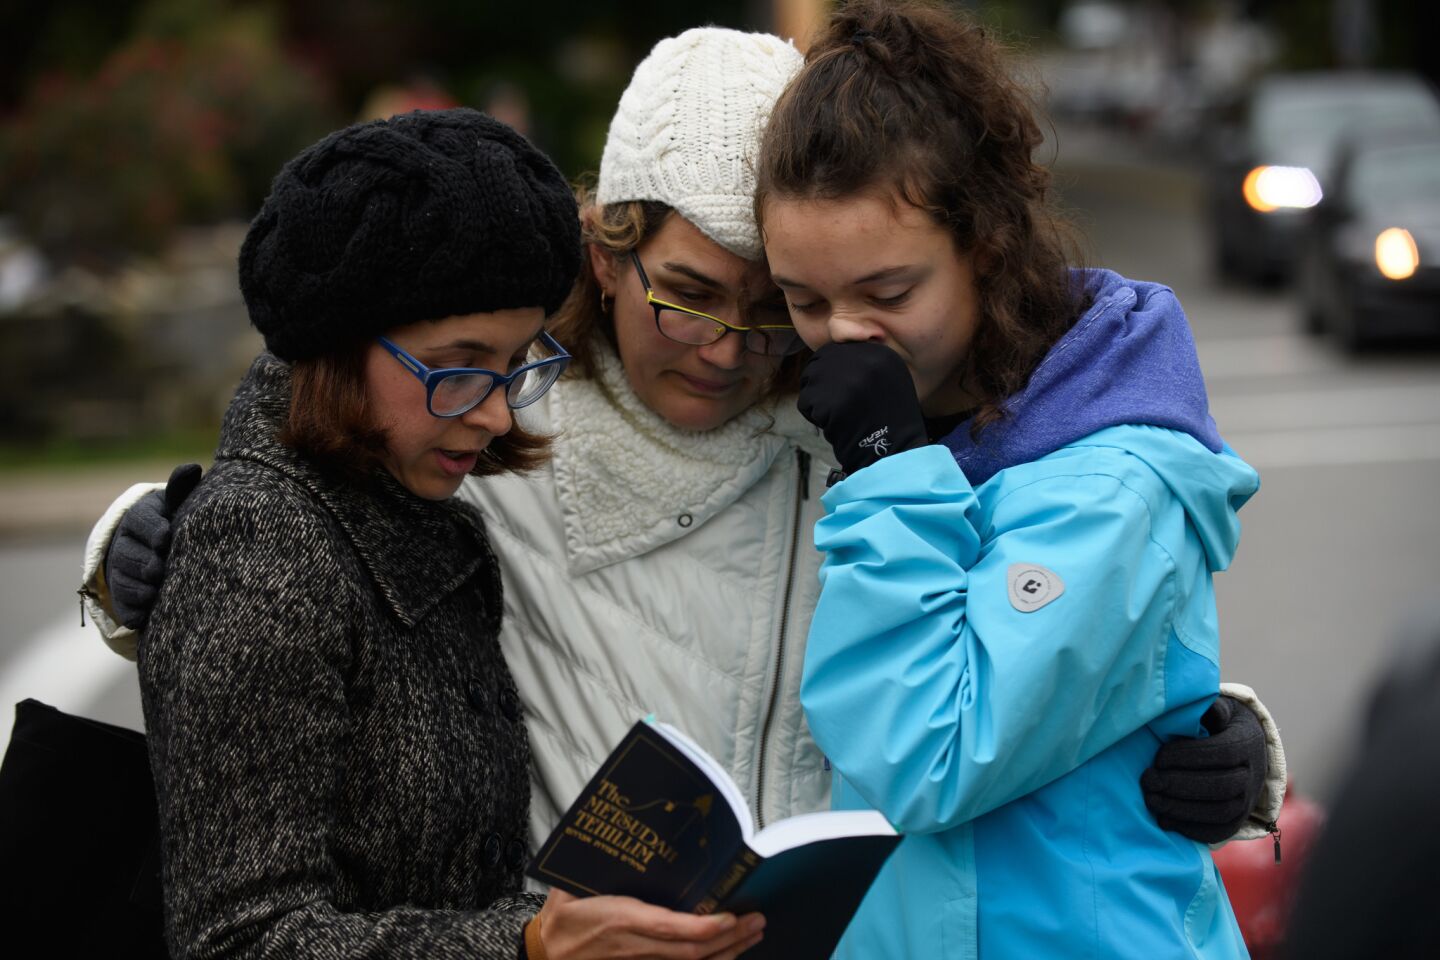 Tammy Hepps, Kate Rothstein and her daughter, Simone Rothstein, 16, pray from a prayerbook a block away from the site of a mass shooting at the Tree of Life synagogue in Pittsburgh on Oct. 27, 2018.